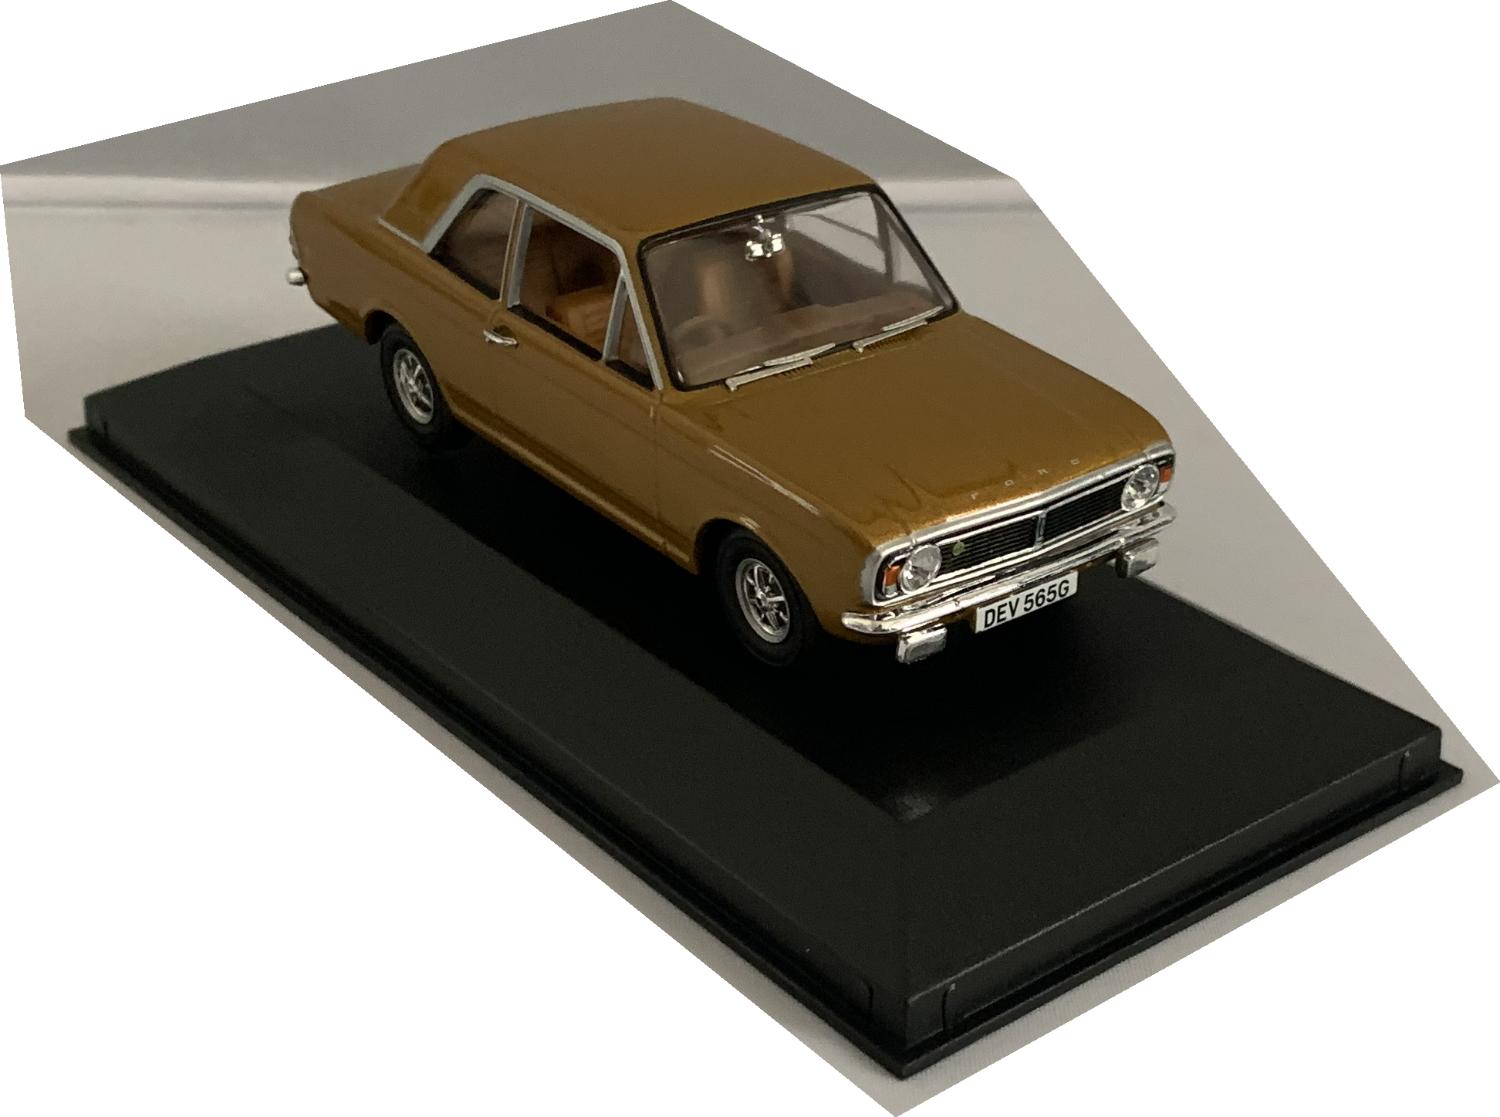 Ford Cortina mk 2 Twin Cam (Lotus) in amber gold, 1968  Colin Chapman’s car, 1:43 scale model from Corgi Vanguards, limited edition model